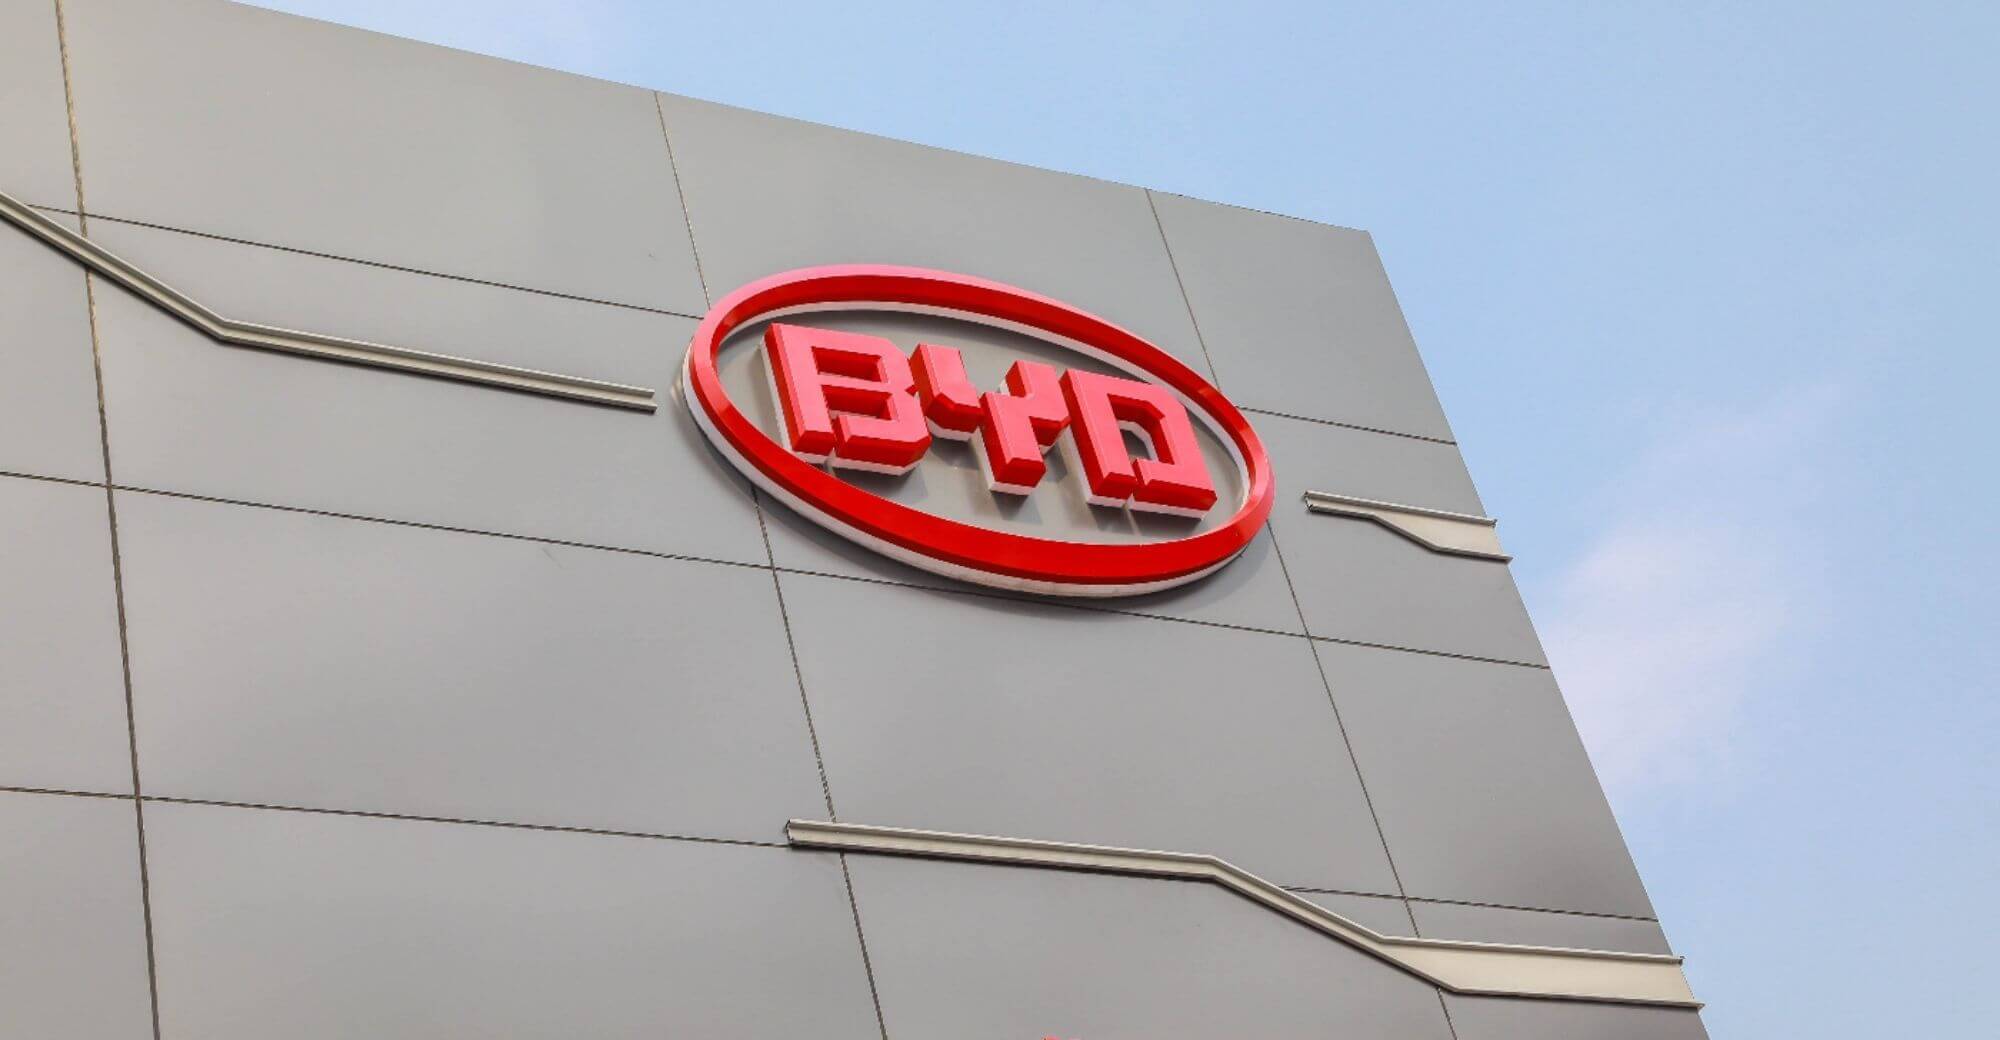 BYD Breaks Ground: Secures China’s First Level 3 Autonomous Driving Permit for High-Speed Roads, Leading Charge in AV Advancements